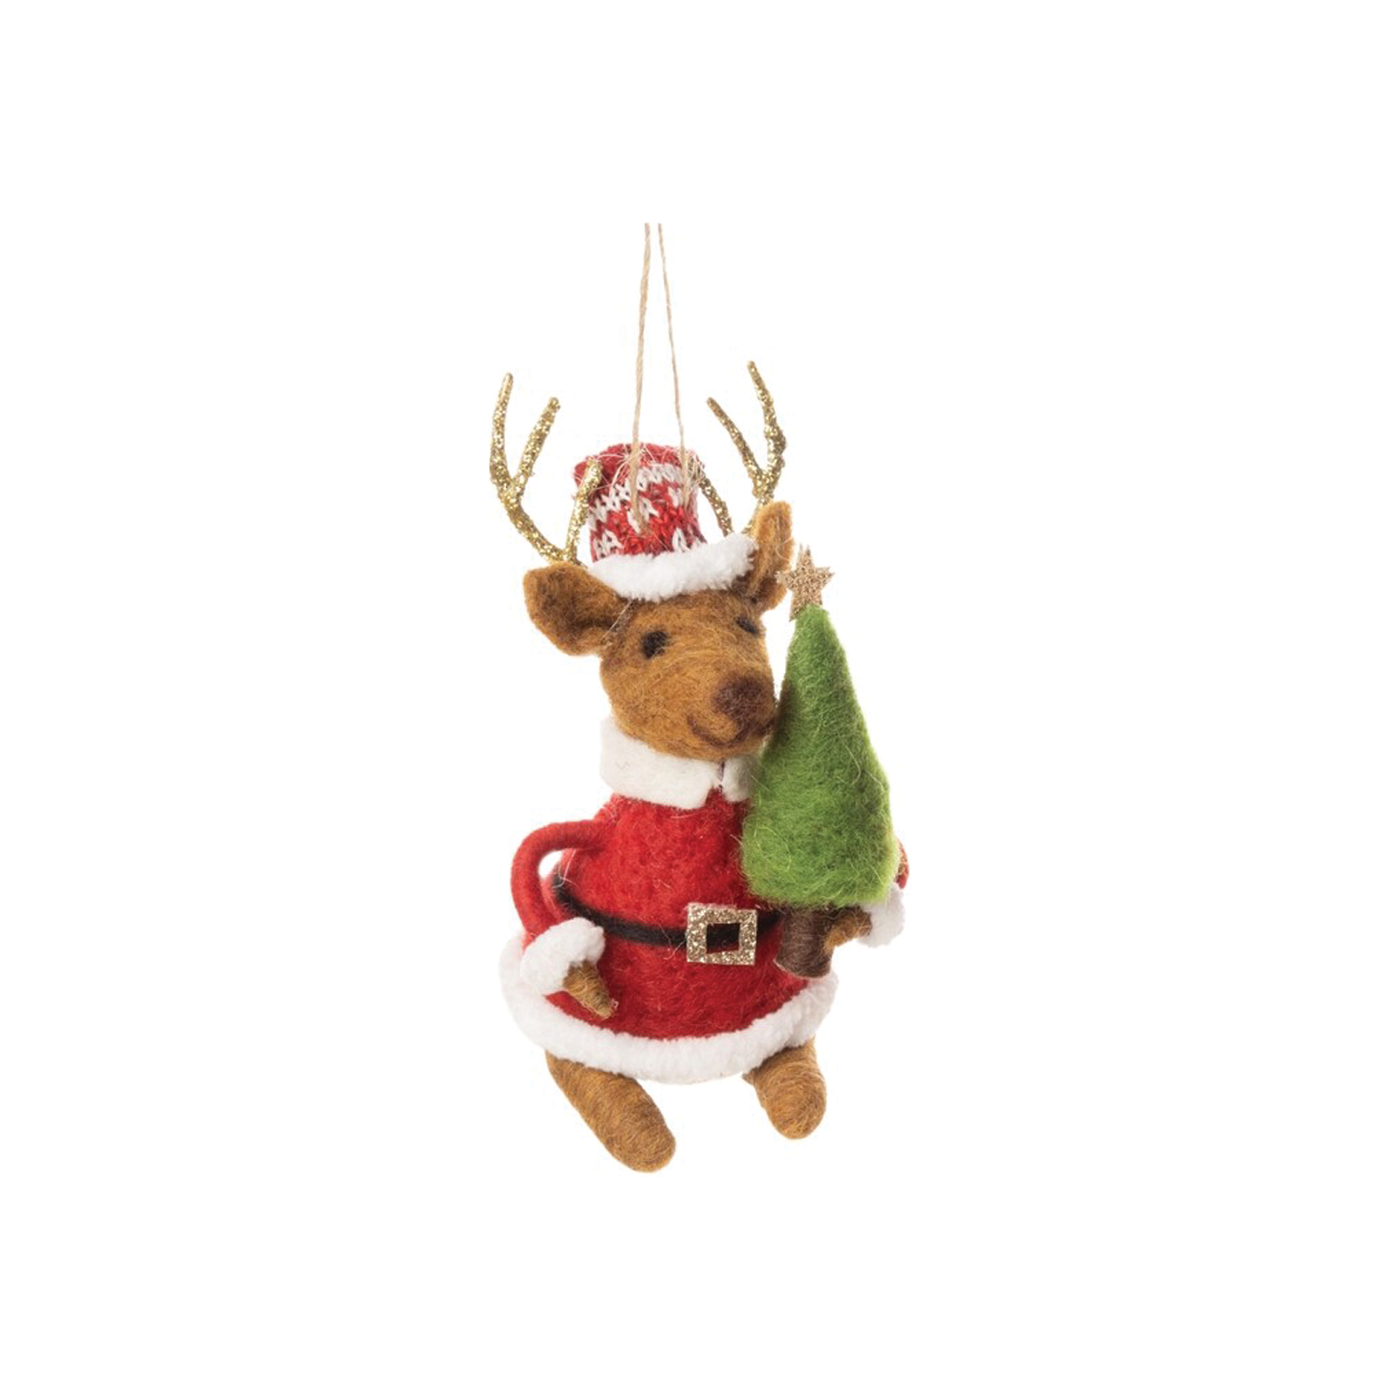 Reindeer In Santa Outfits Felt Ornament - With Tree